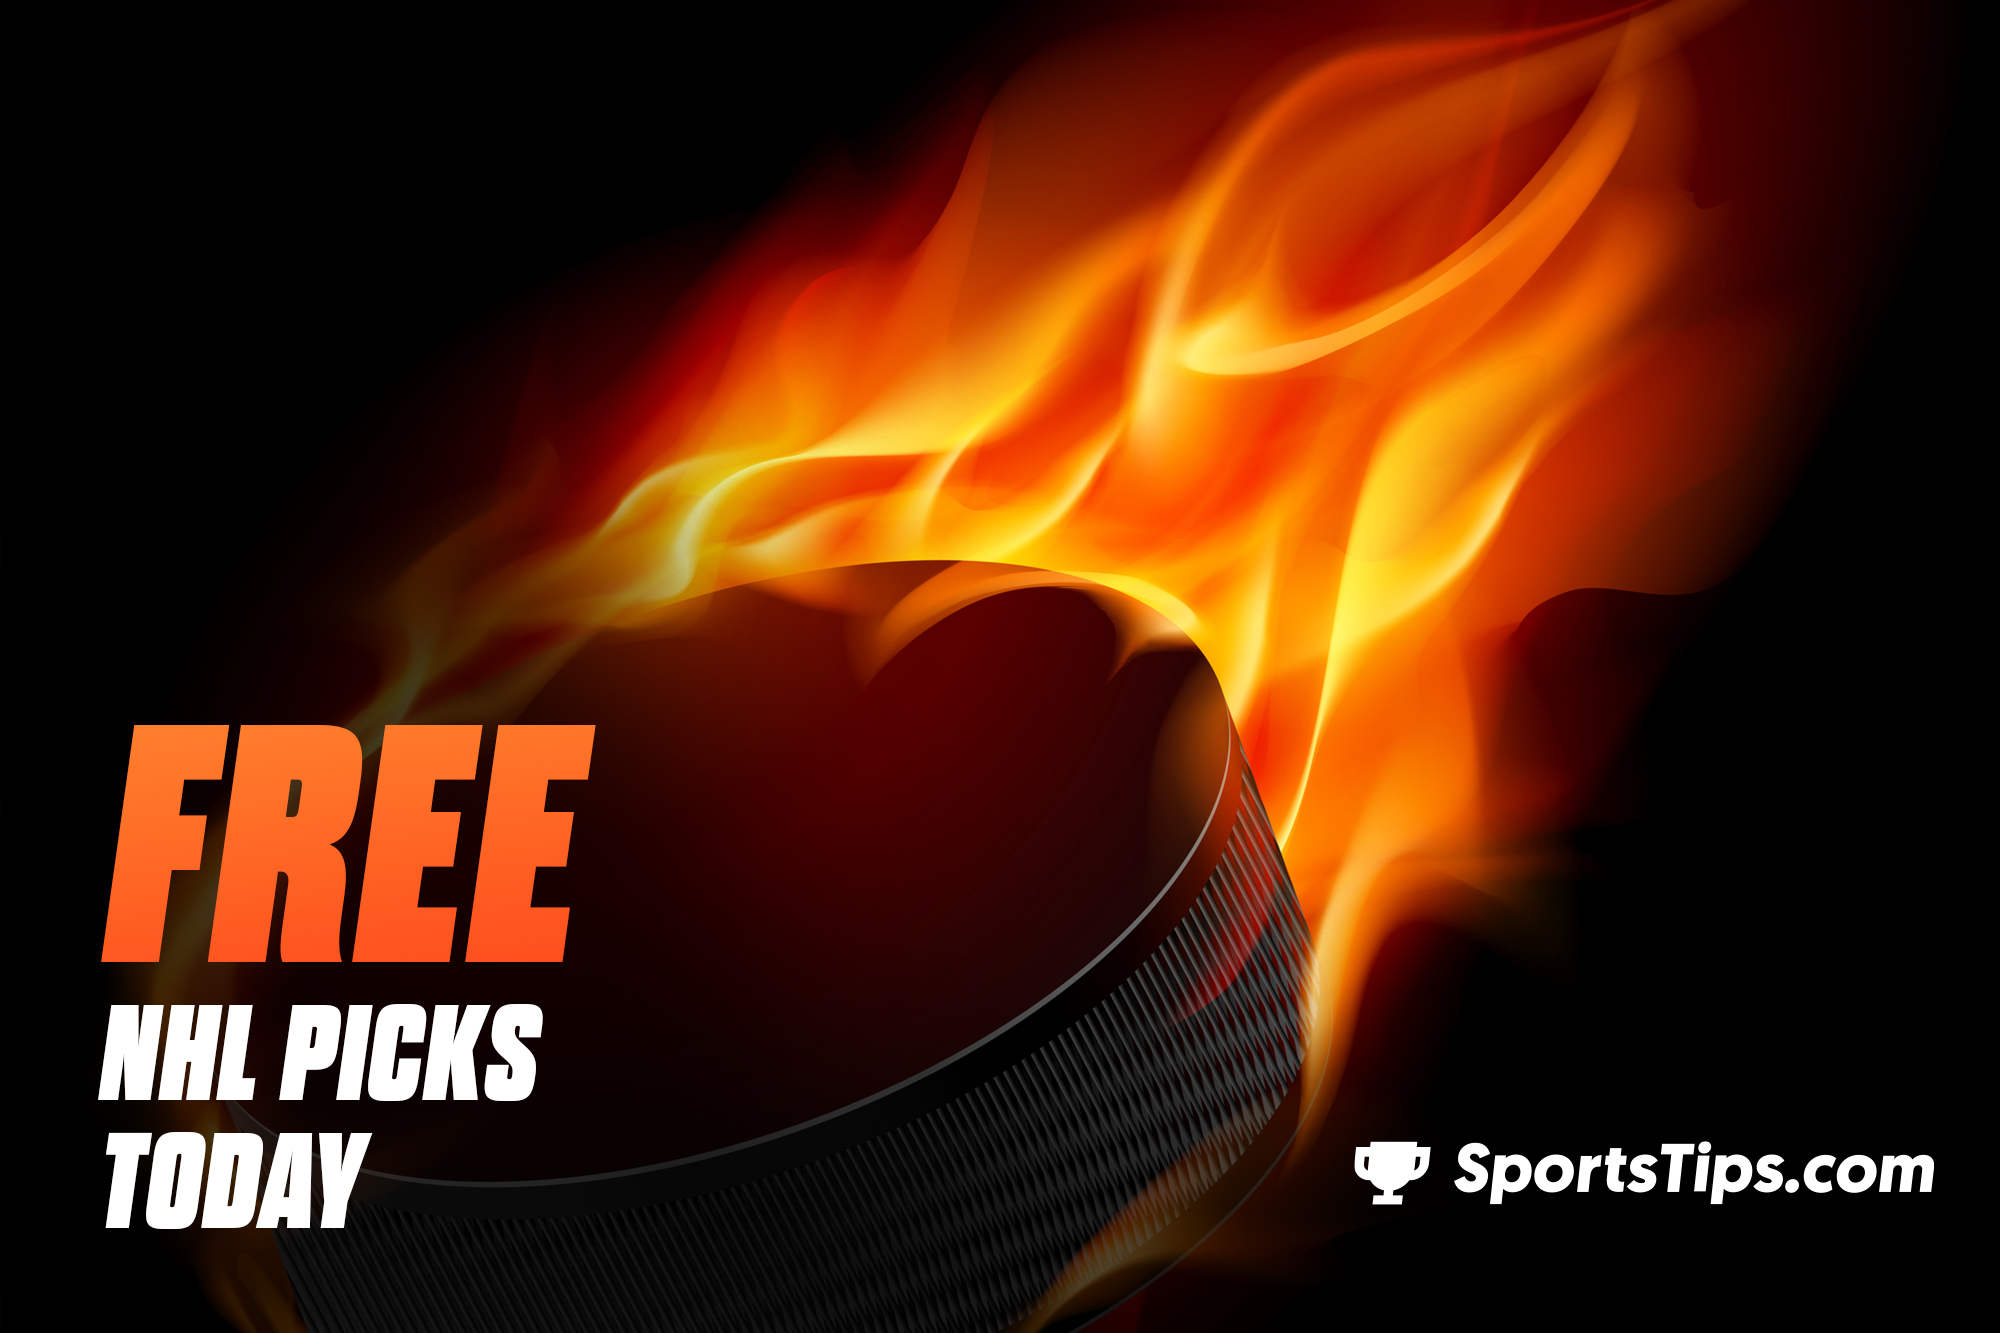 Free NHL Picks Today for Wednesday, February 23rd, 2022